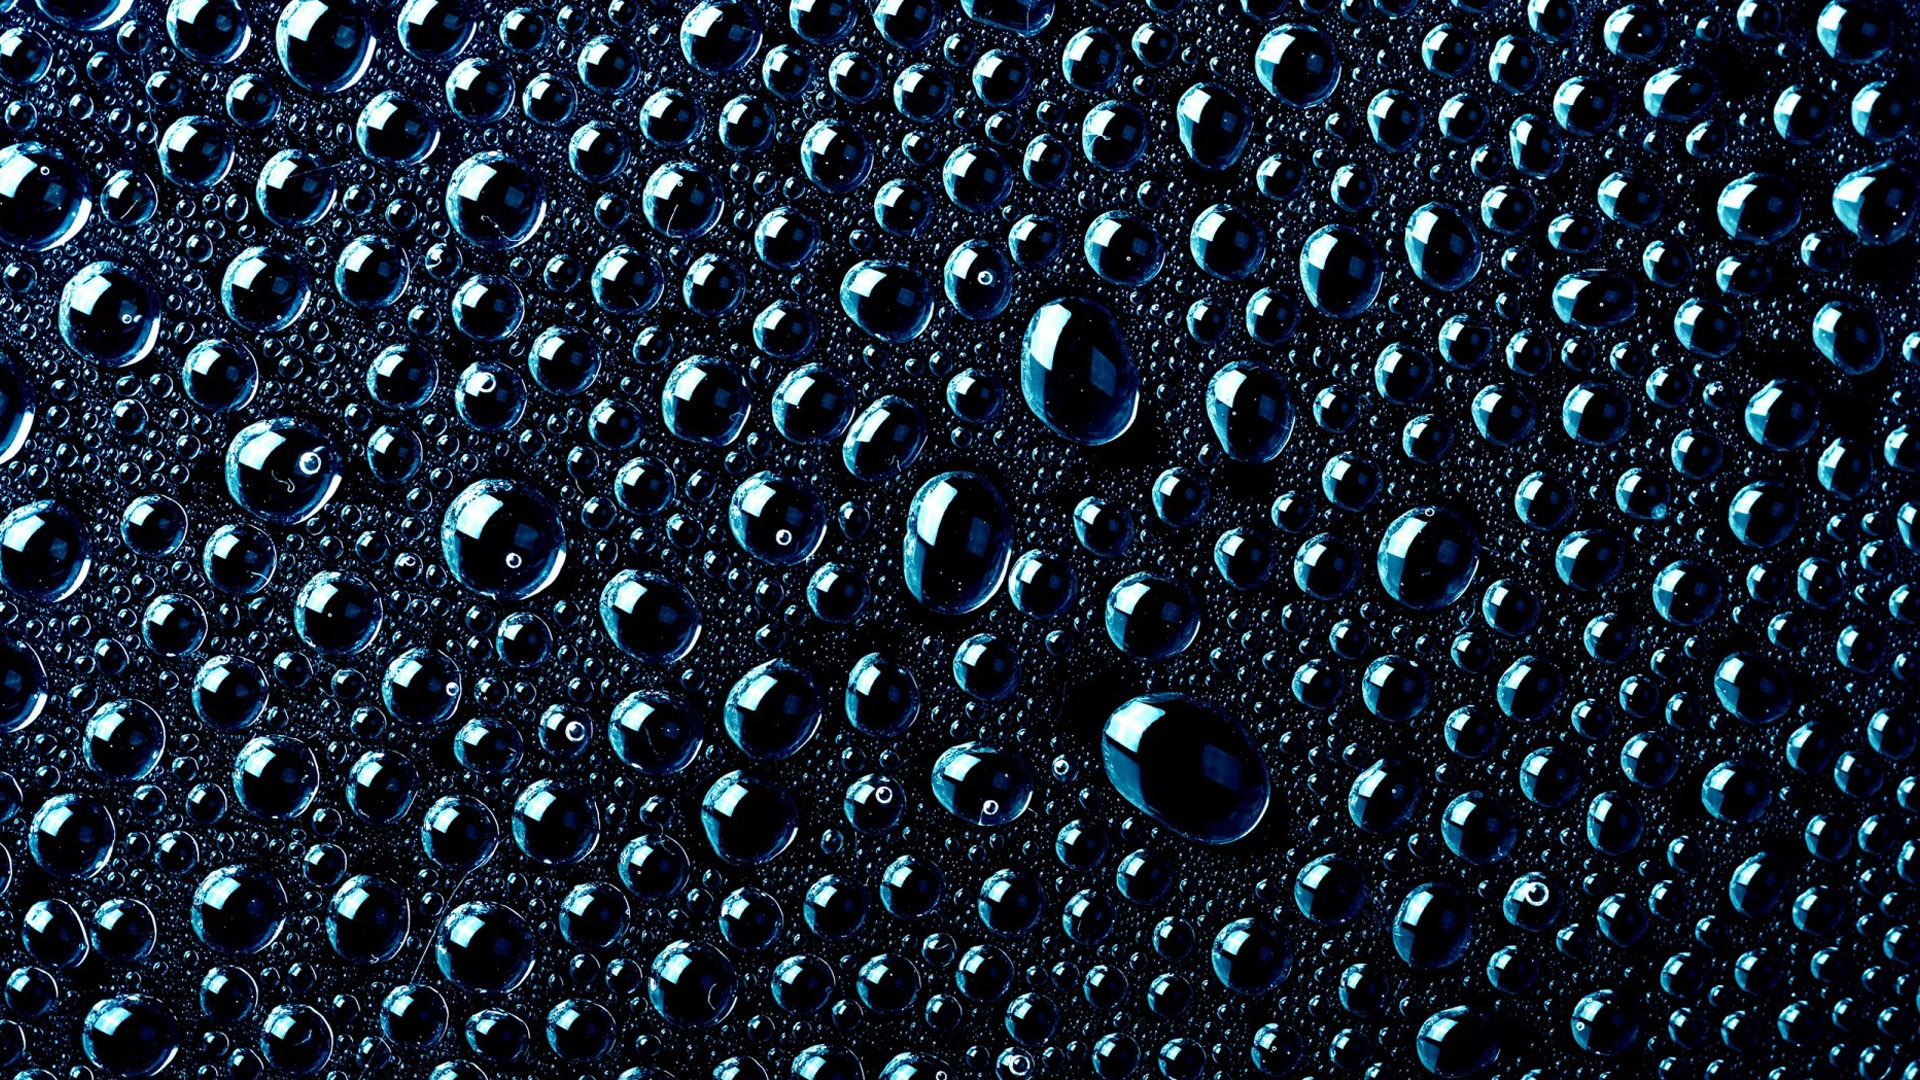 Water Drops On A Black Surface Wallpaper